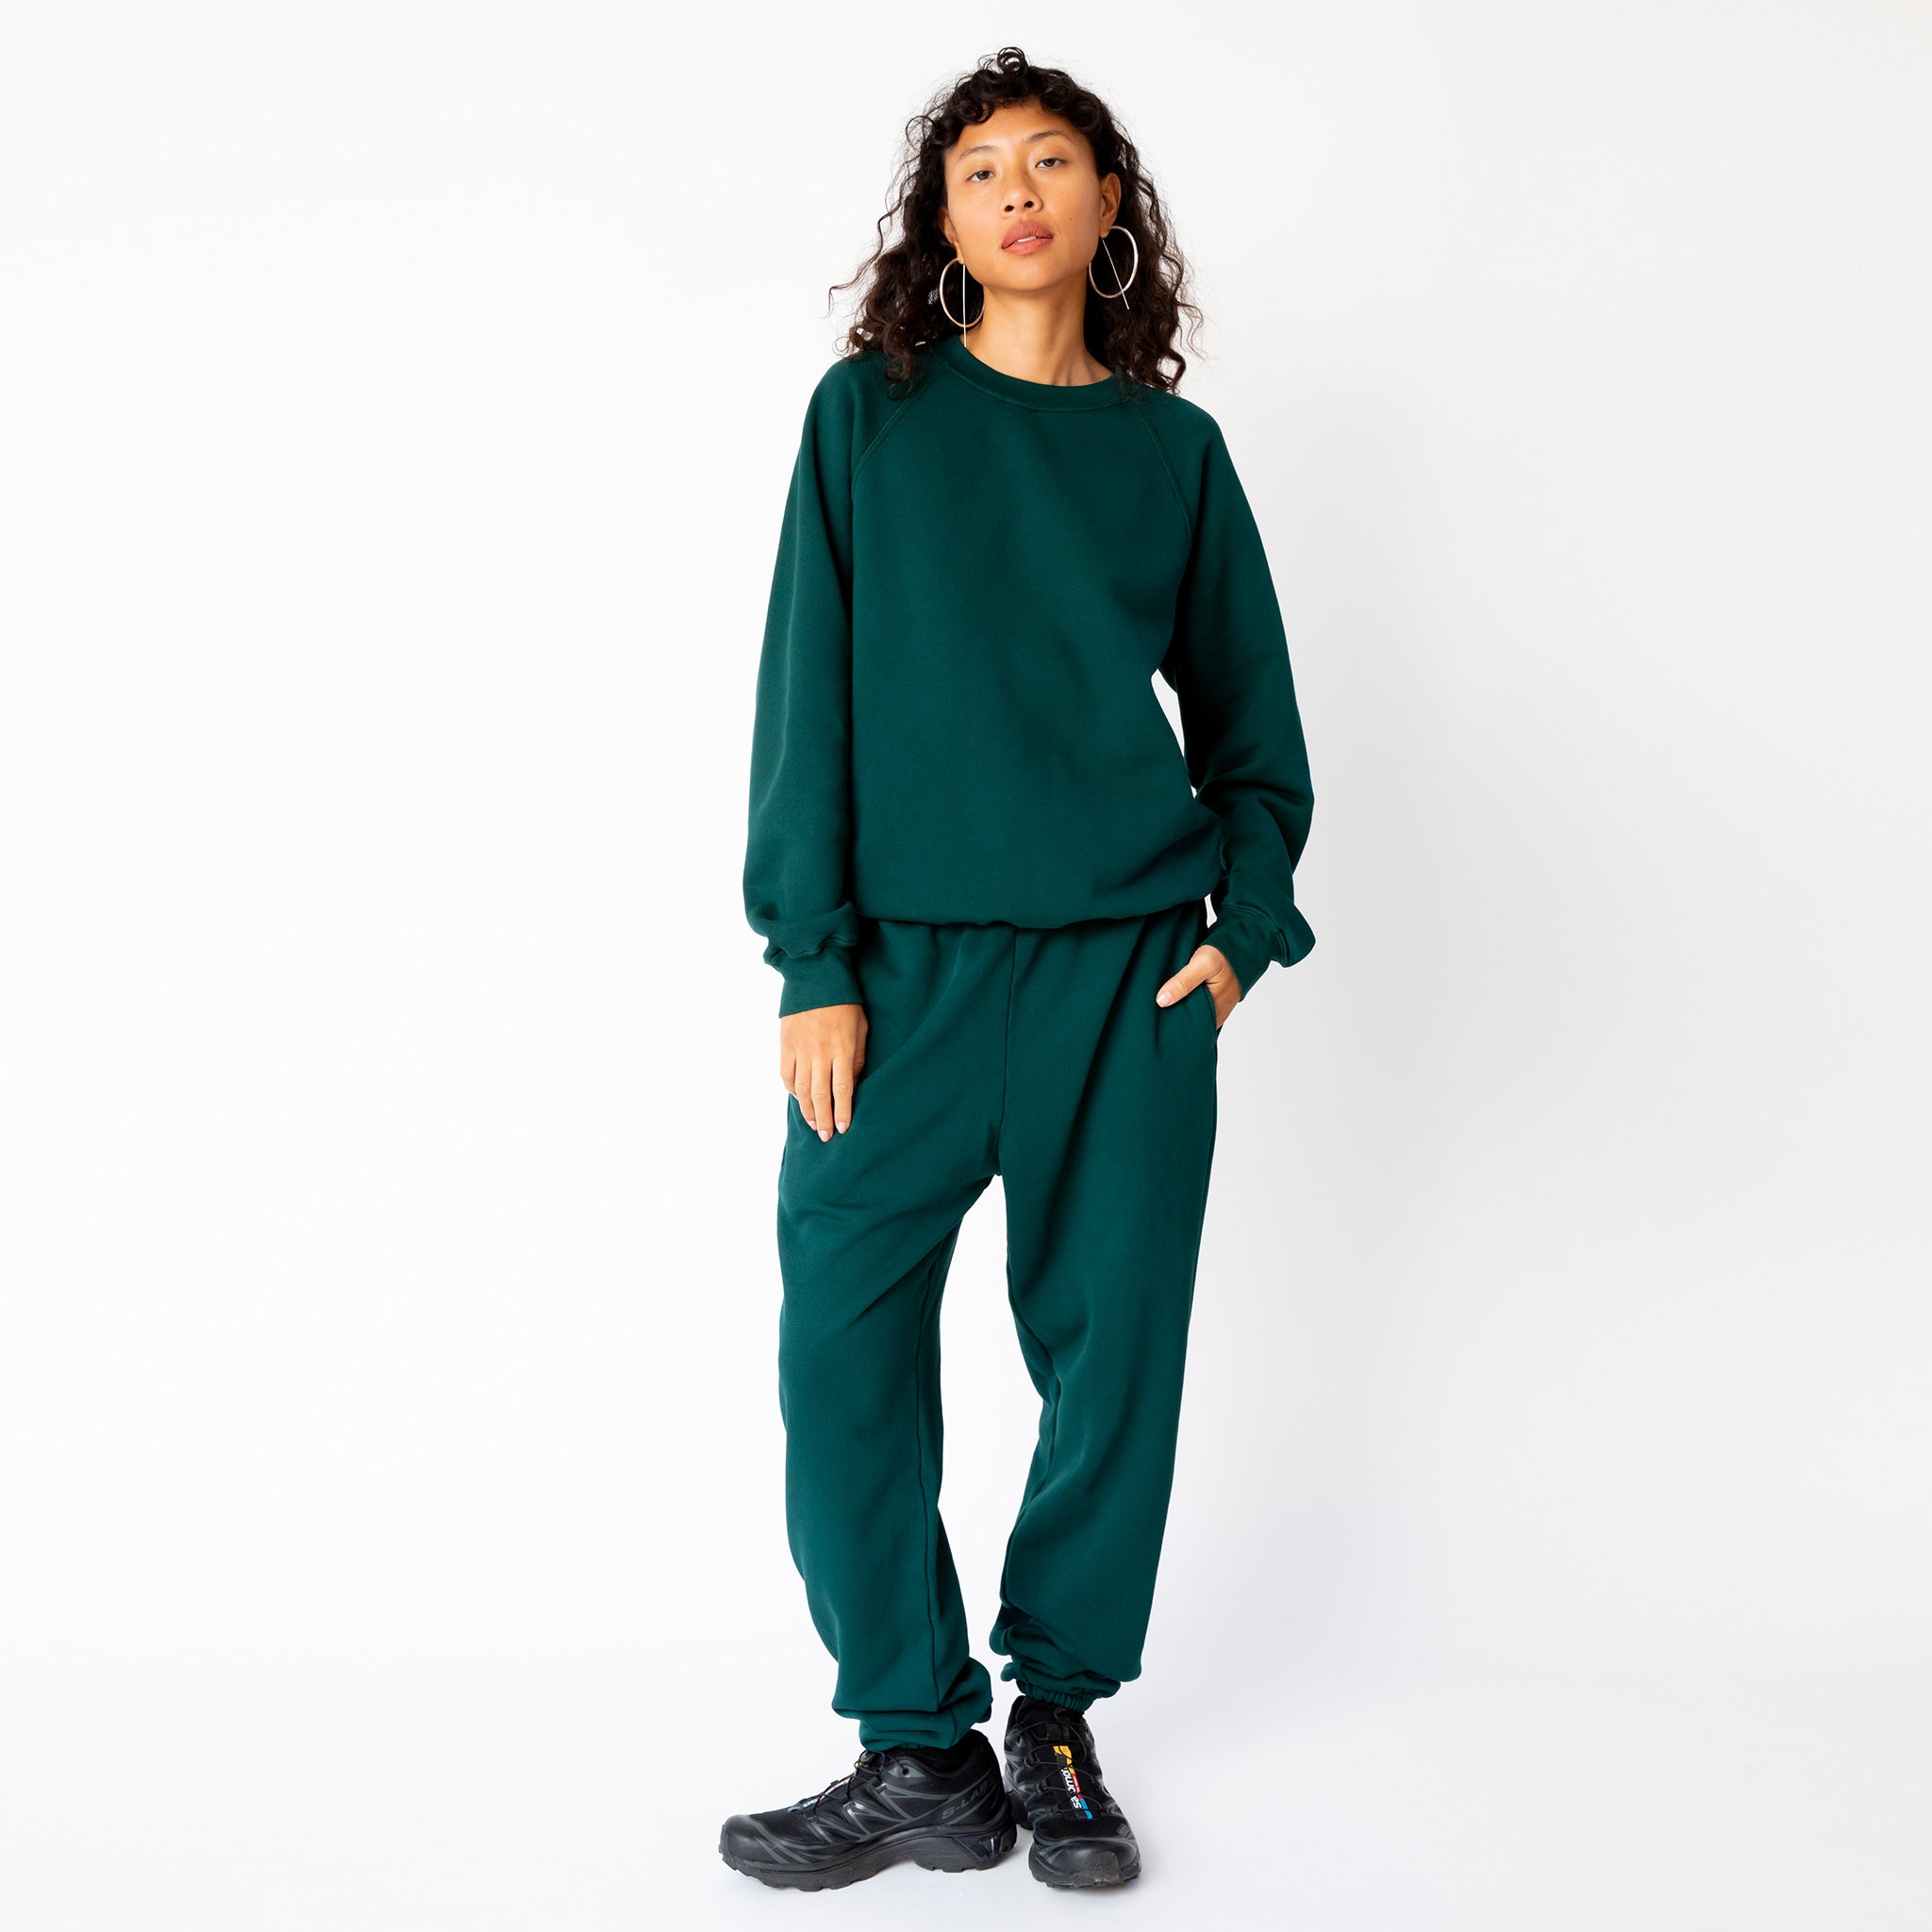 A model wears the classic raglan sweatshirt by Les Tien in an emerald green color - full outfit view, paired with matching sweatpants.